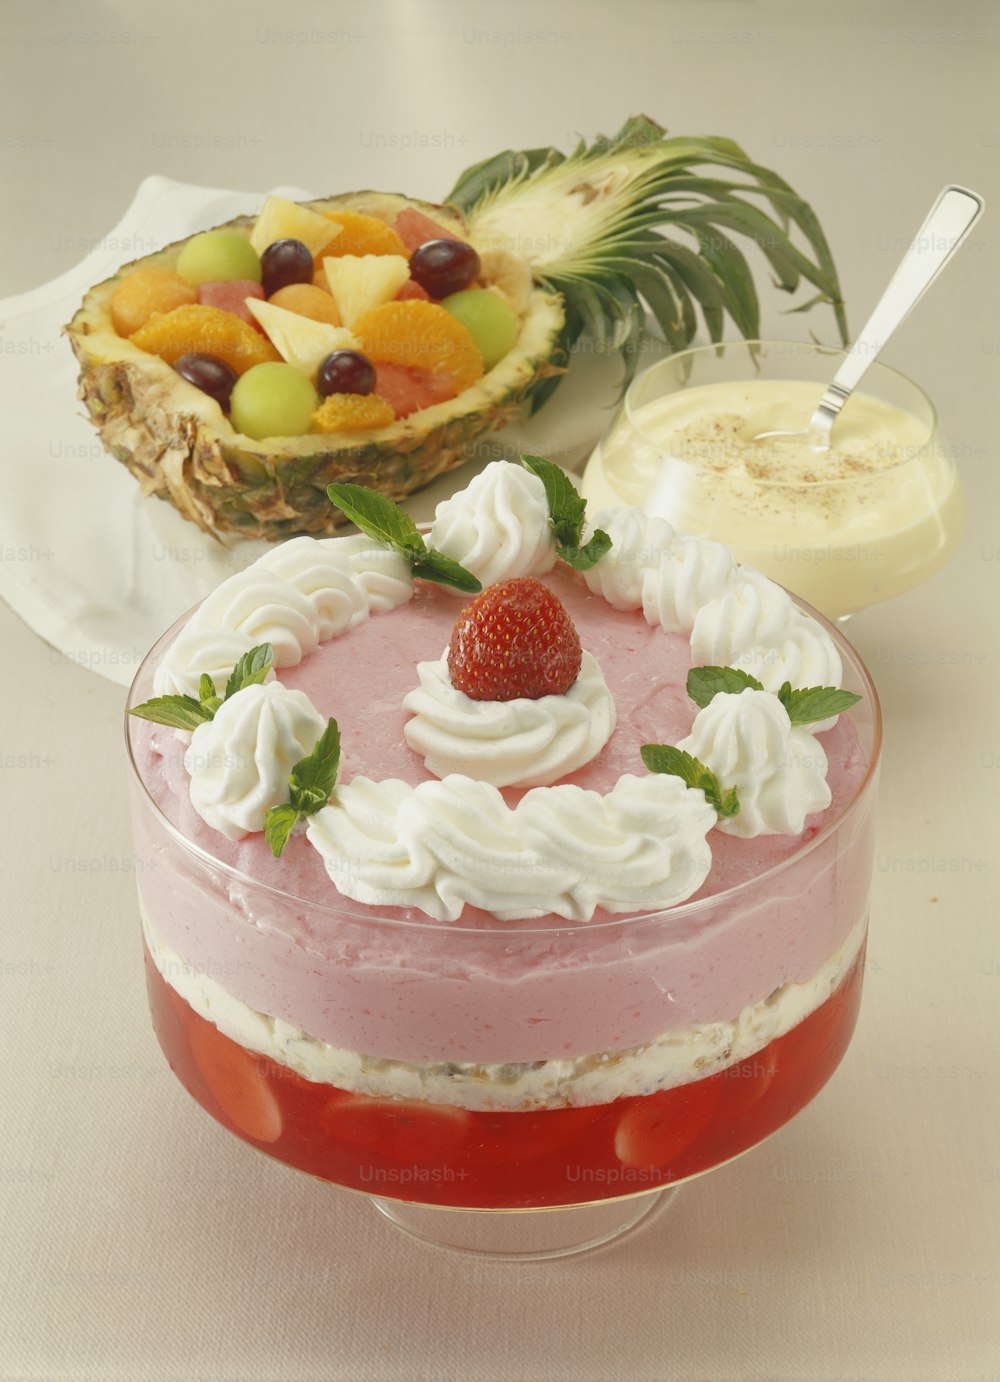 a cake with fruit on top of it on a table